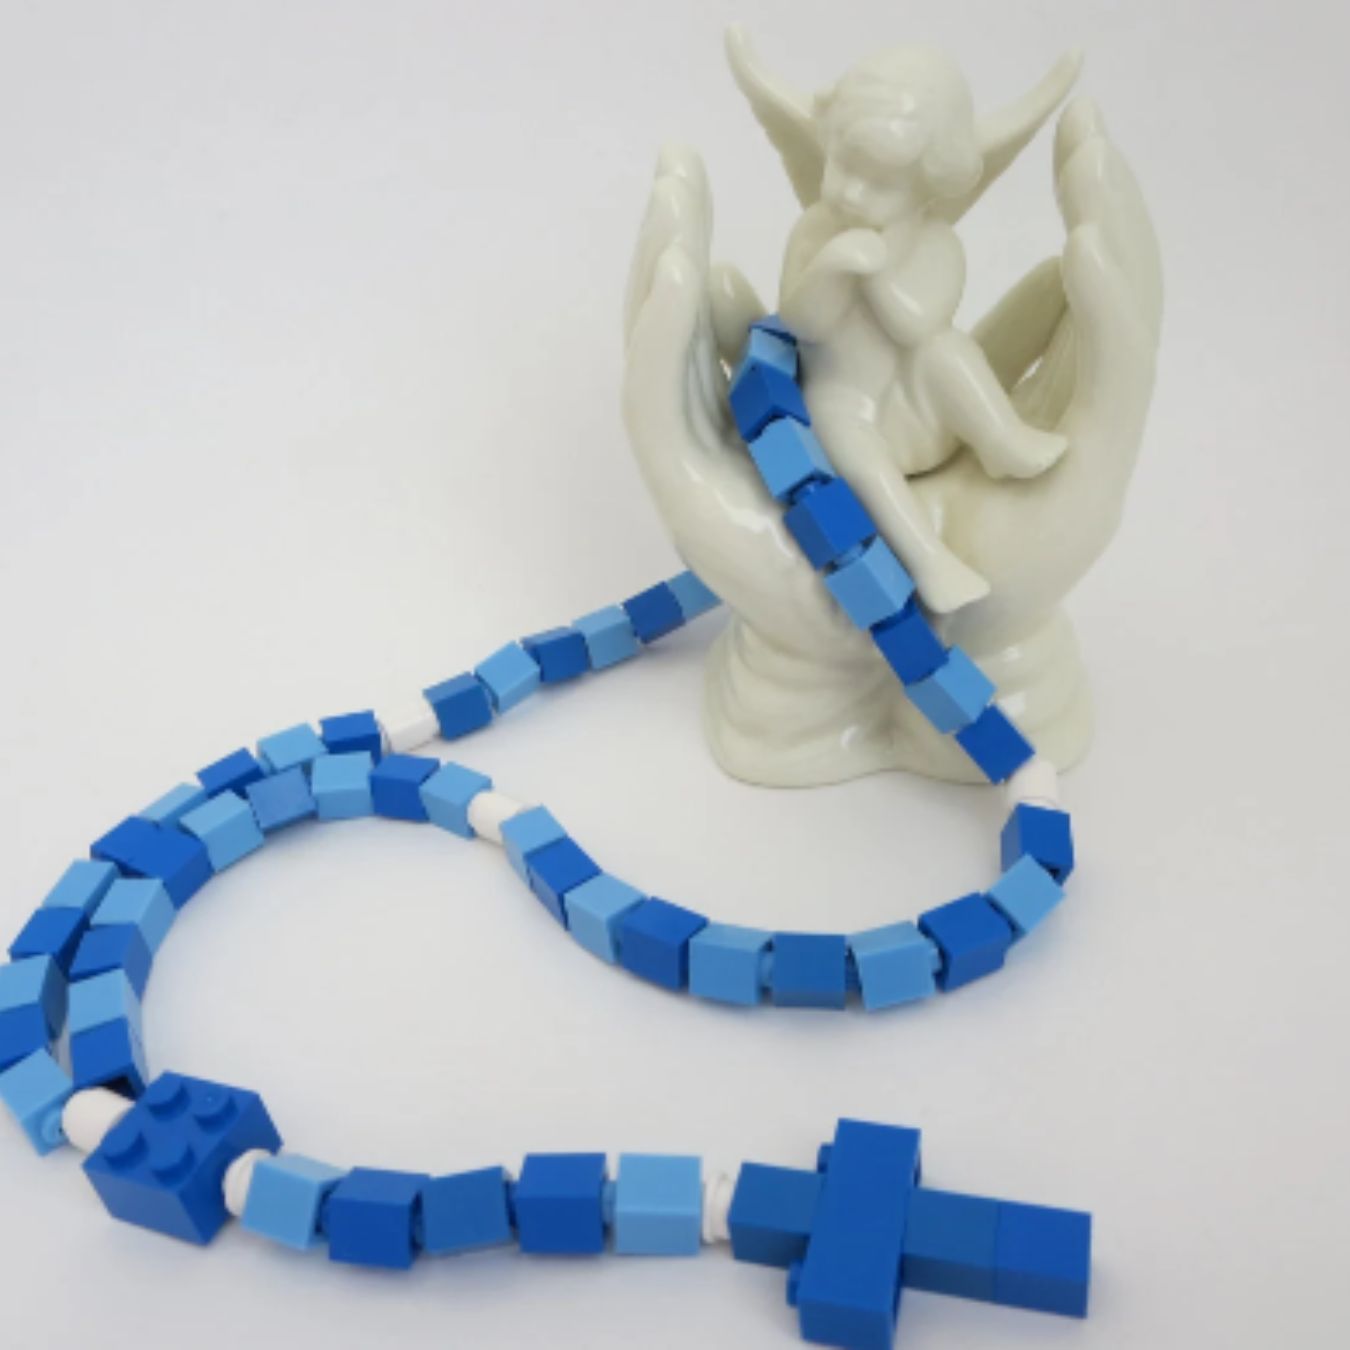 Child rosary made with Lego bricks in two shapes of blue.